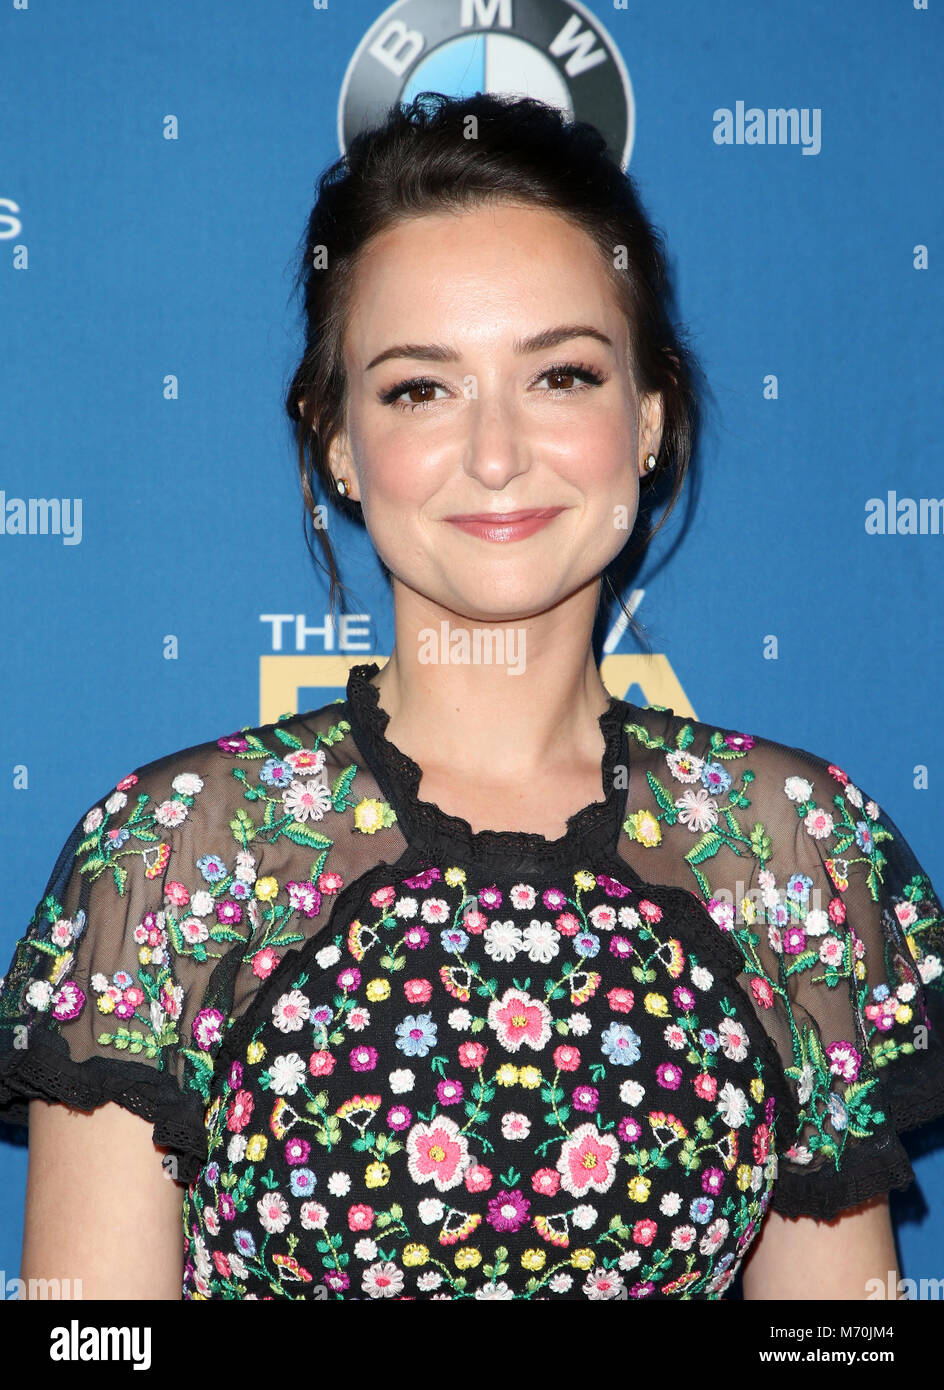 70th Annual Directors Guild Of America Awards  Featuring: Milana Vayntrub Where: Beverly Hills, California, United States When: 03 Feb 2018 Credit: FayesVision/WENN.com Stock Photo